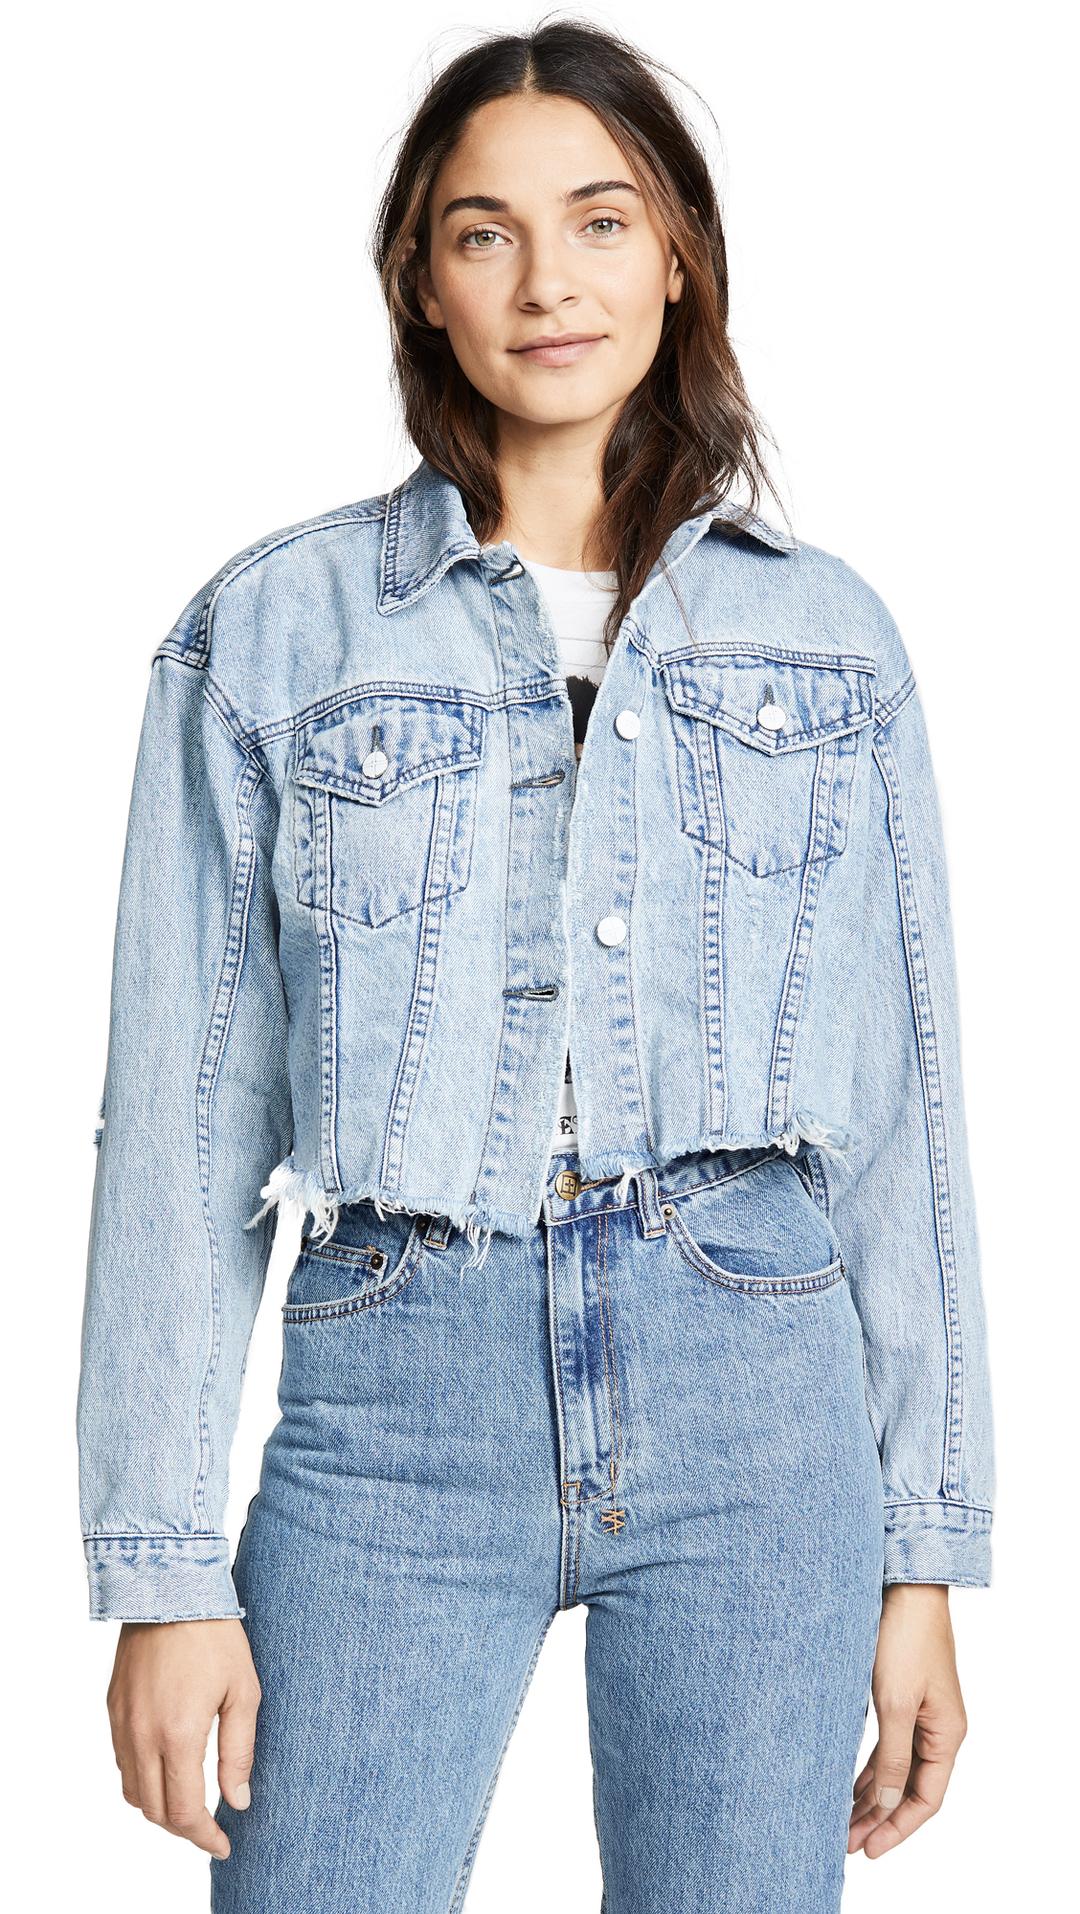 90s jean jacket outfit